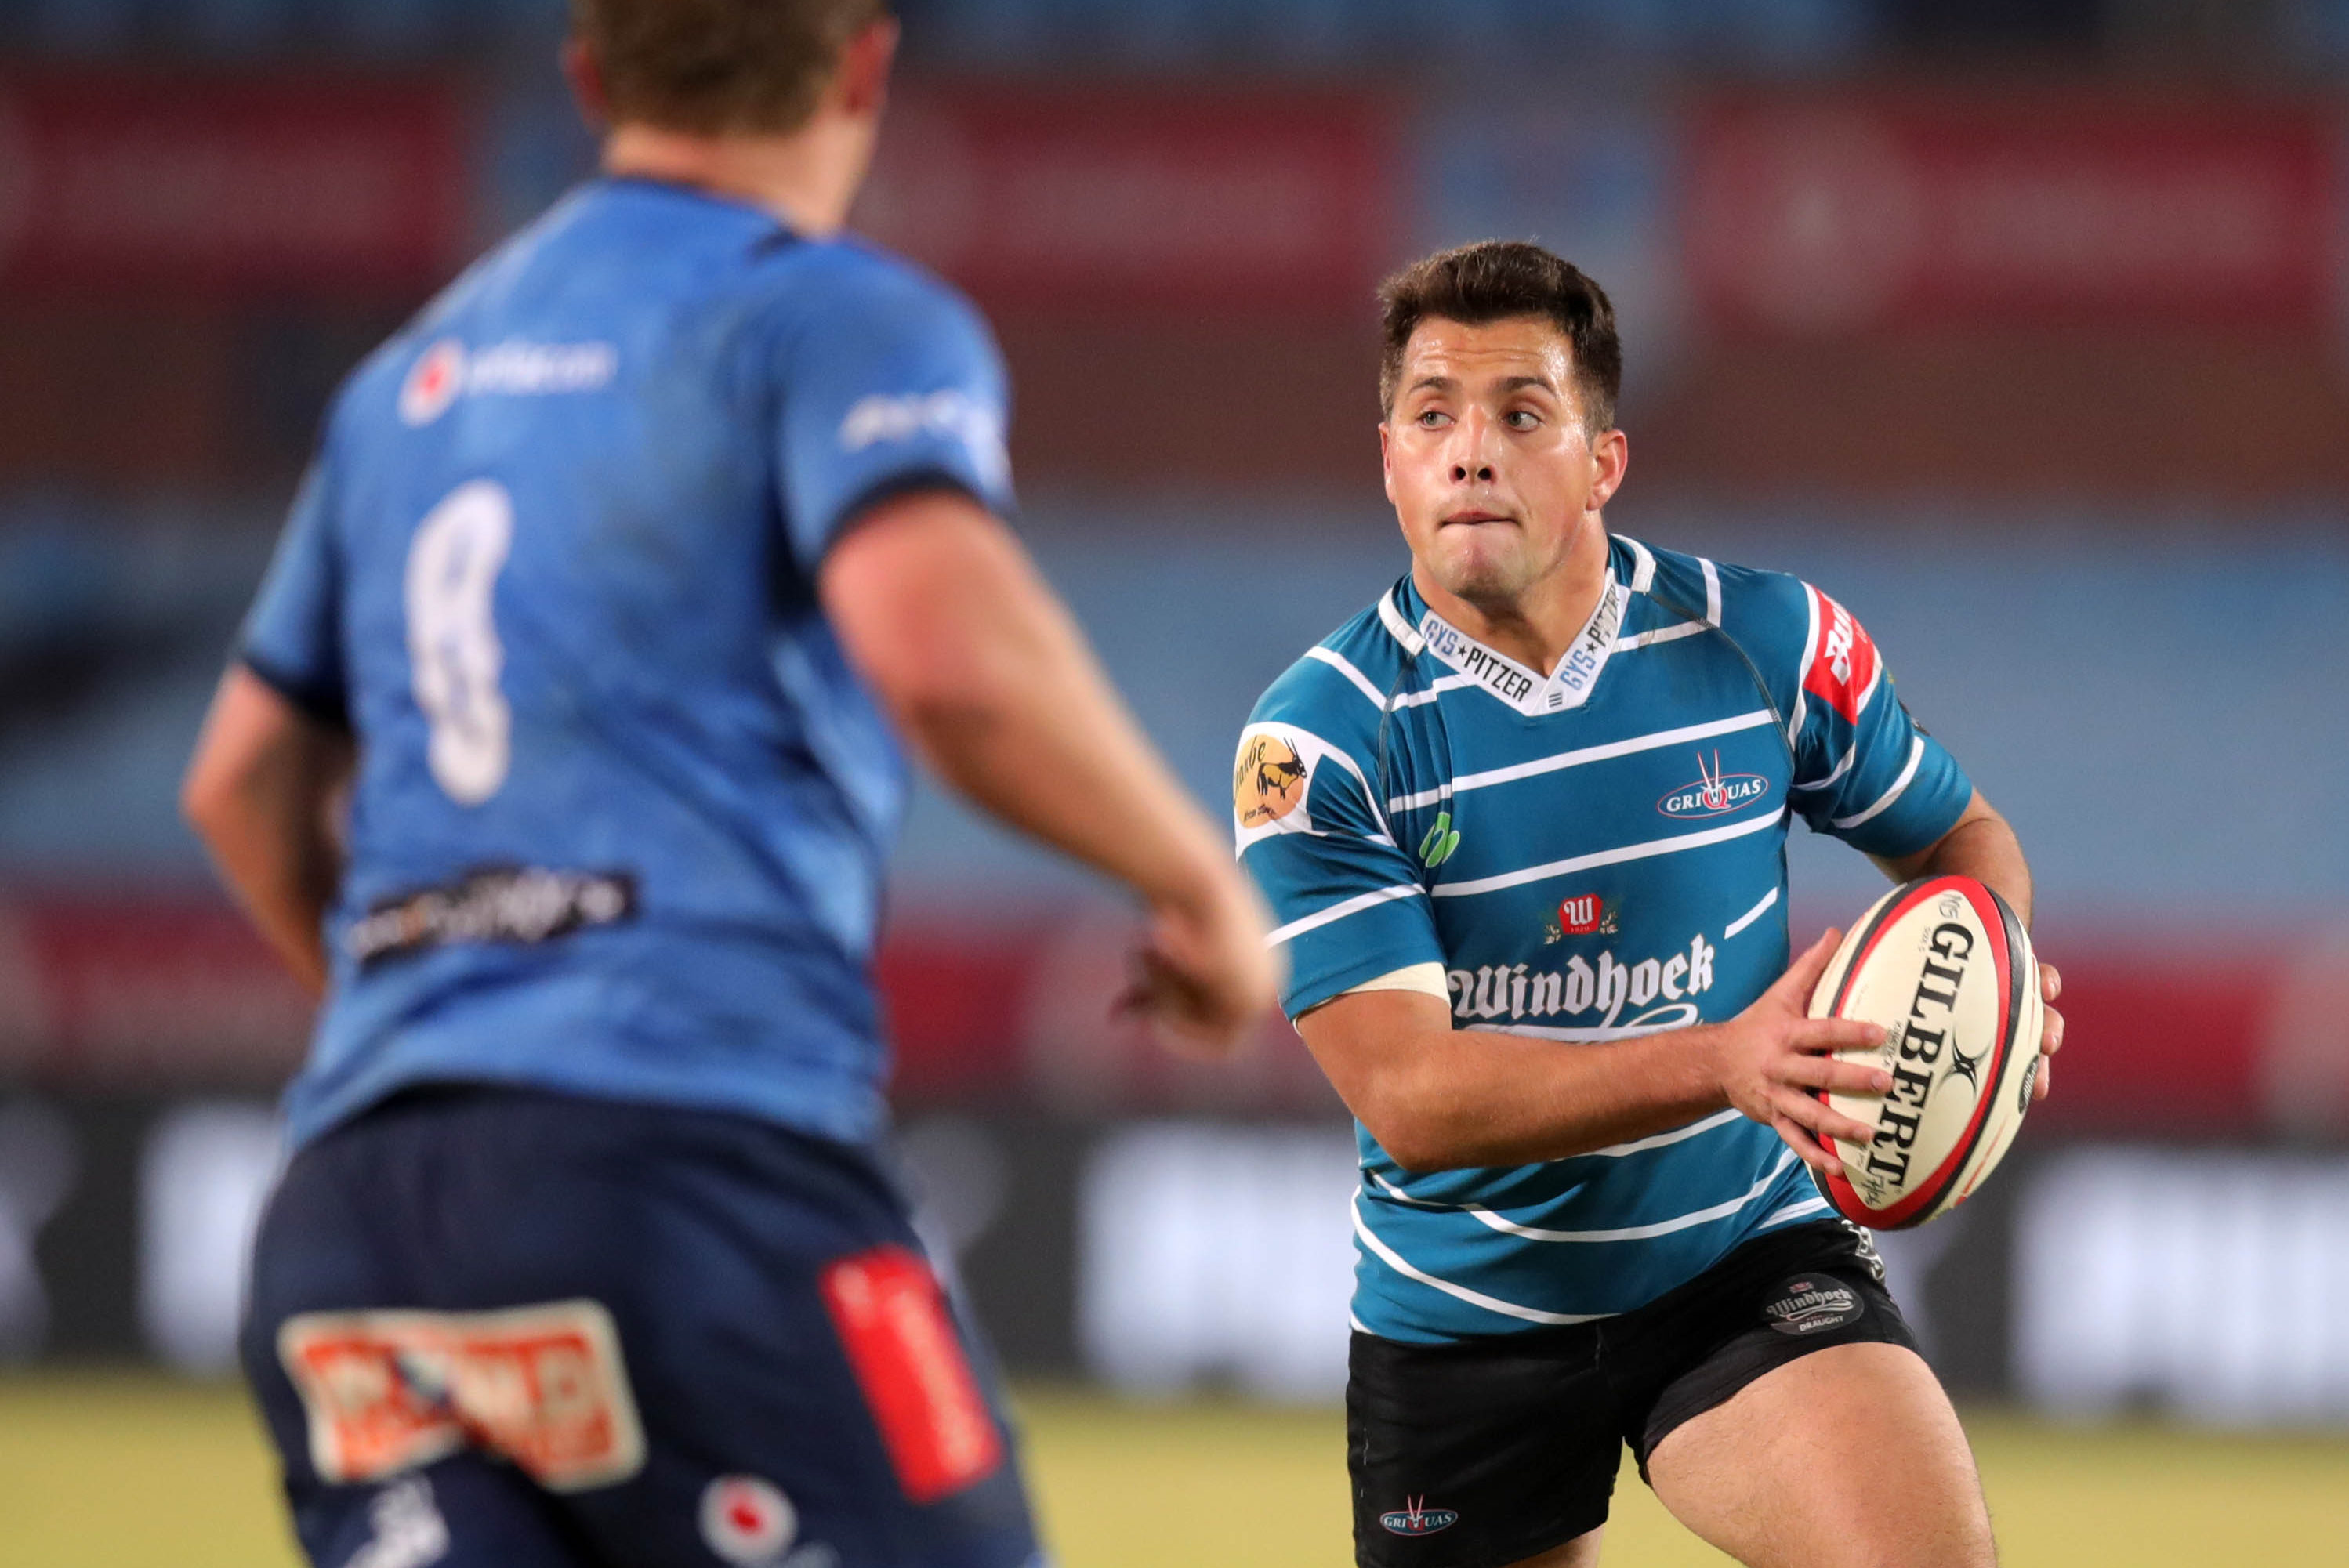 Rynhardt Jonker of the Griquas challenged by Muller Uys of the Bulls during the Carling Currie Cup 2022 semifinal match between Bulls and Griquas at Loftus Versfeld Stadium, Pretoria on 17 June 2022 ©Samuel Shivambu/BackpagePix